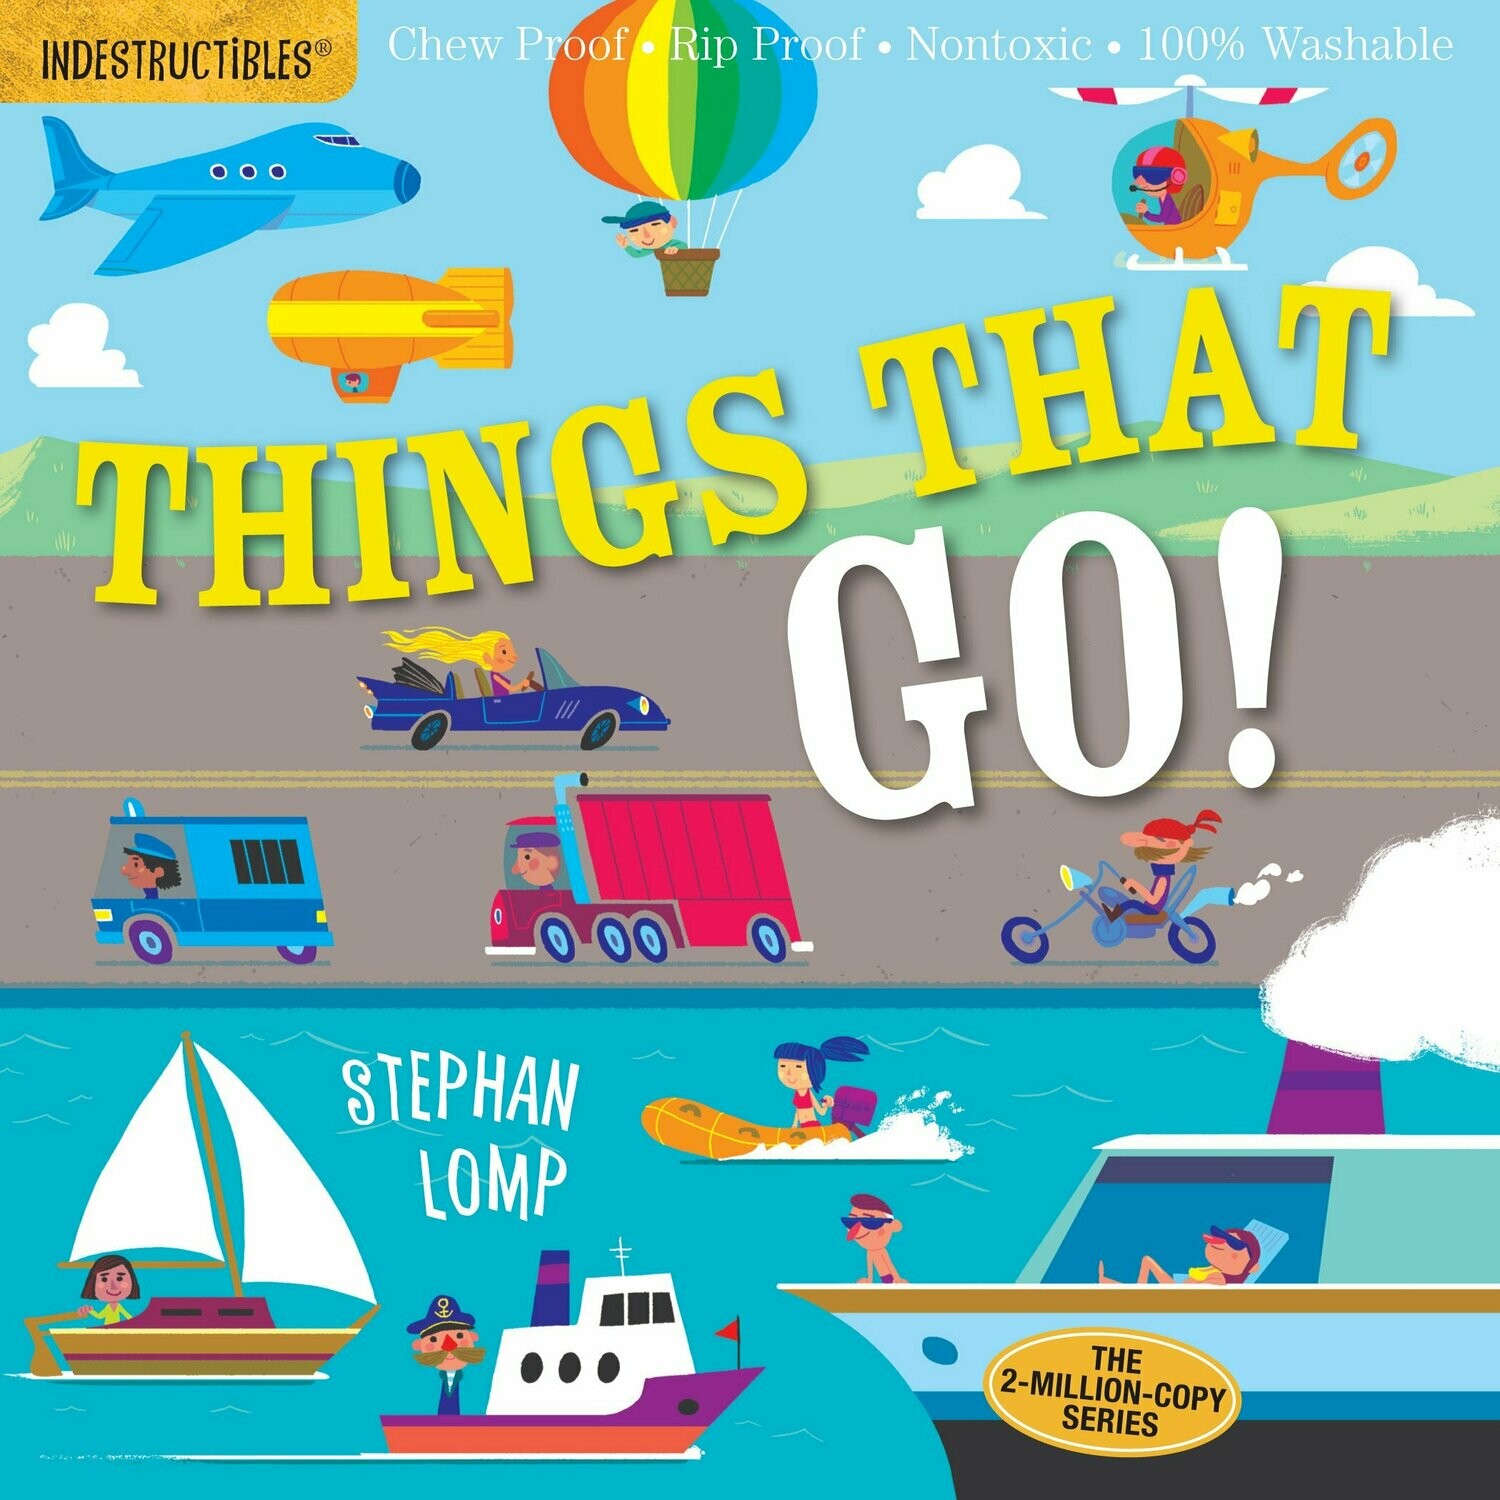 Indestructibles Book "Things That GO!"